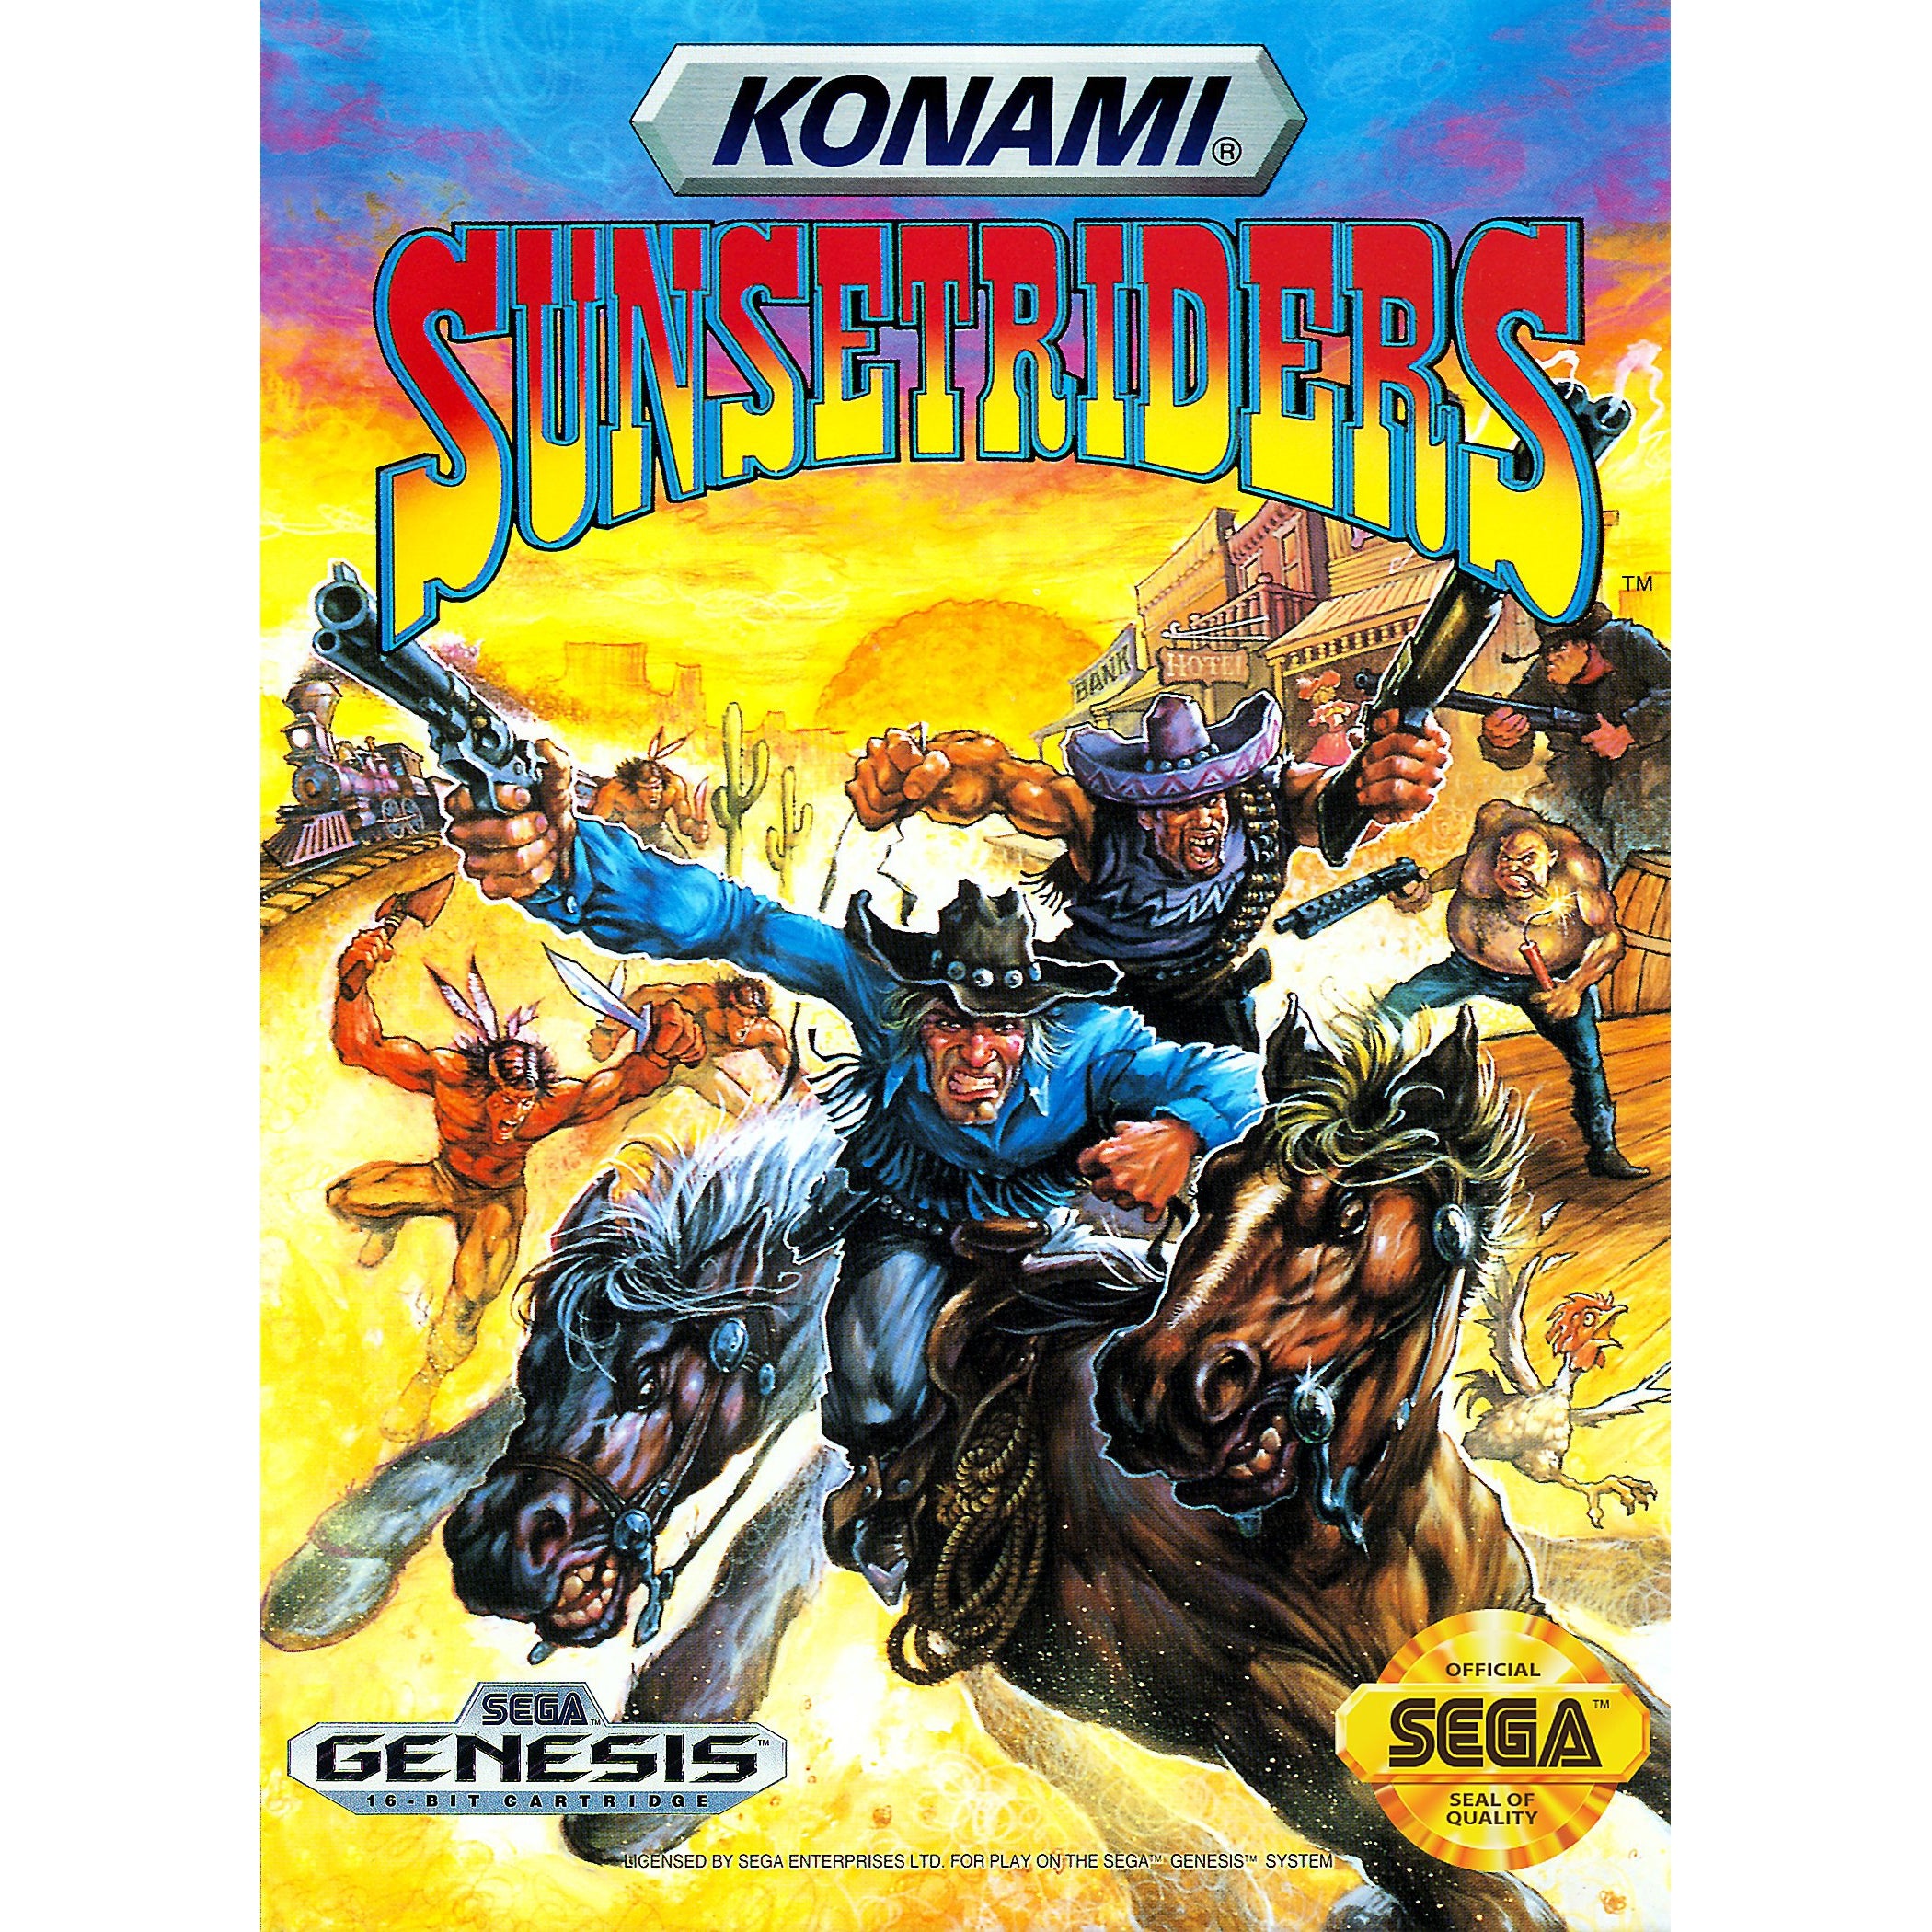 Sunset Riders - Sega Genesis Game Complete - YourGamingShop.com - Buy, Sell, Trade Video Games Online. 120 Day Warranty. Satisfaction Guaranteed.